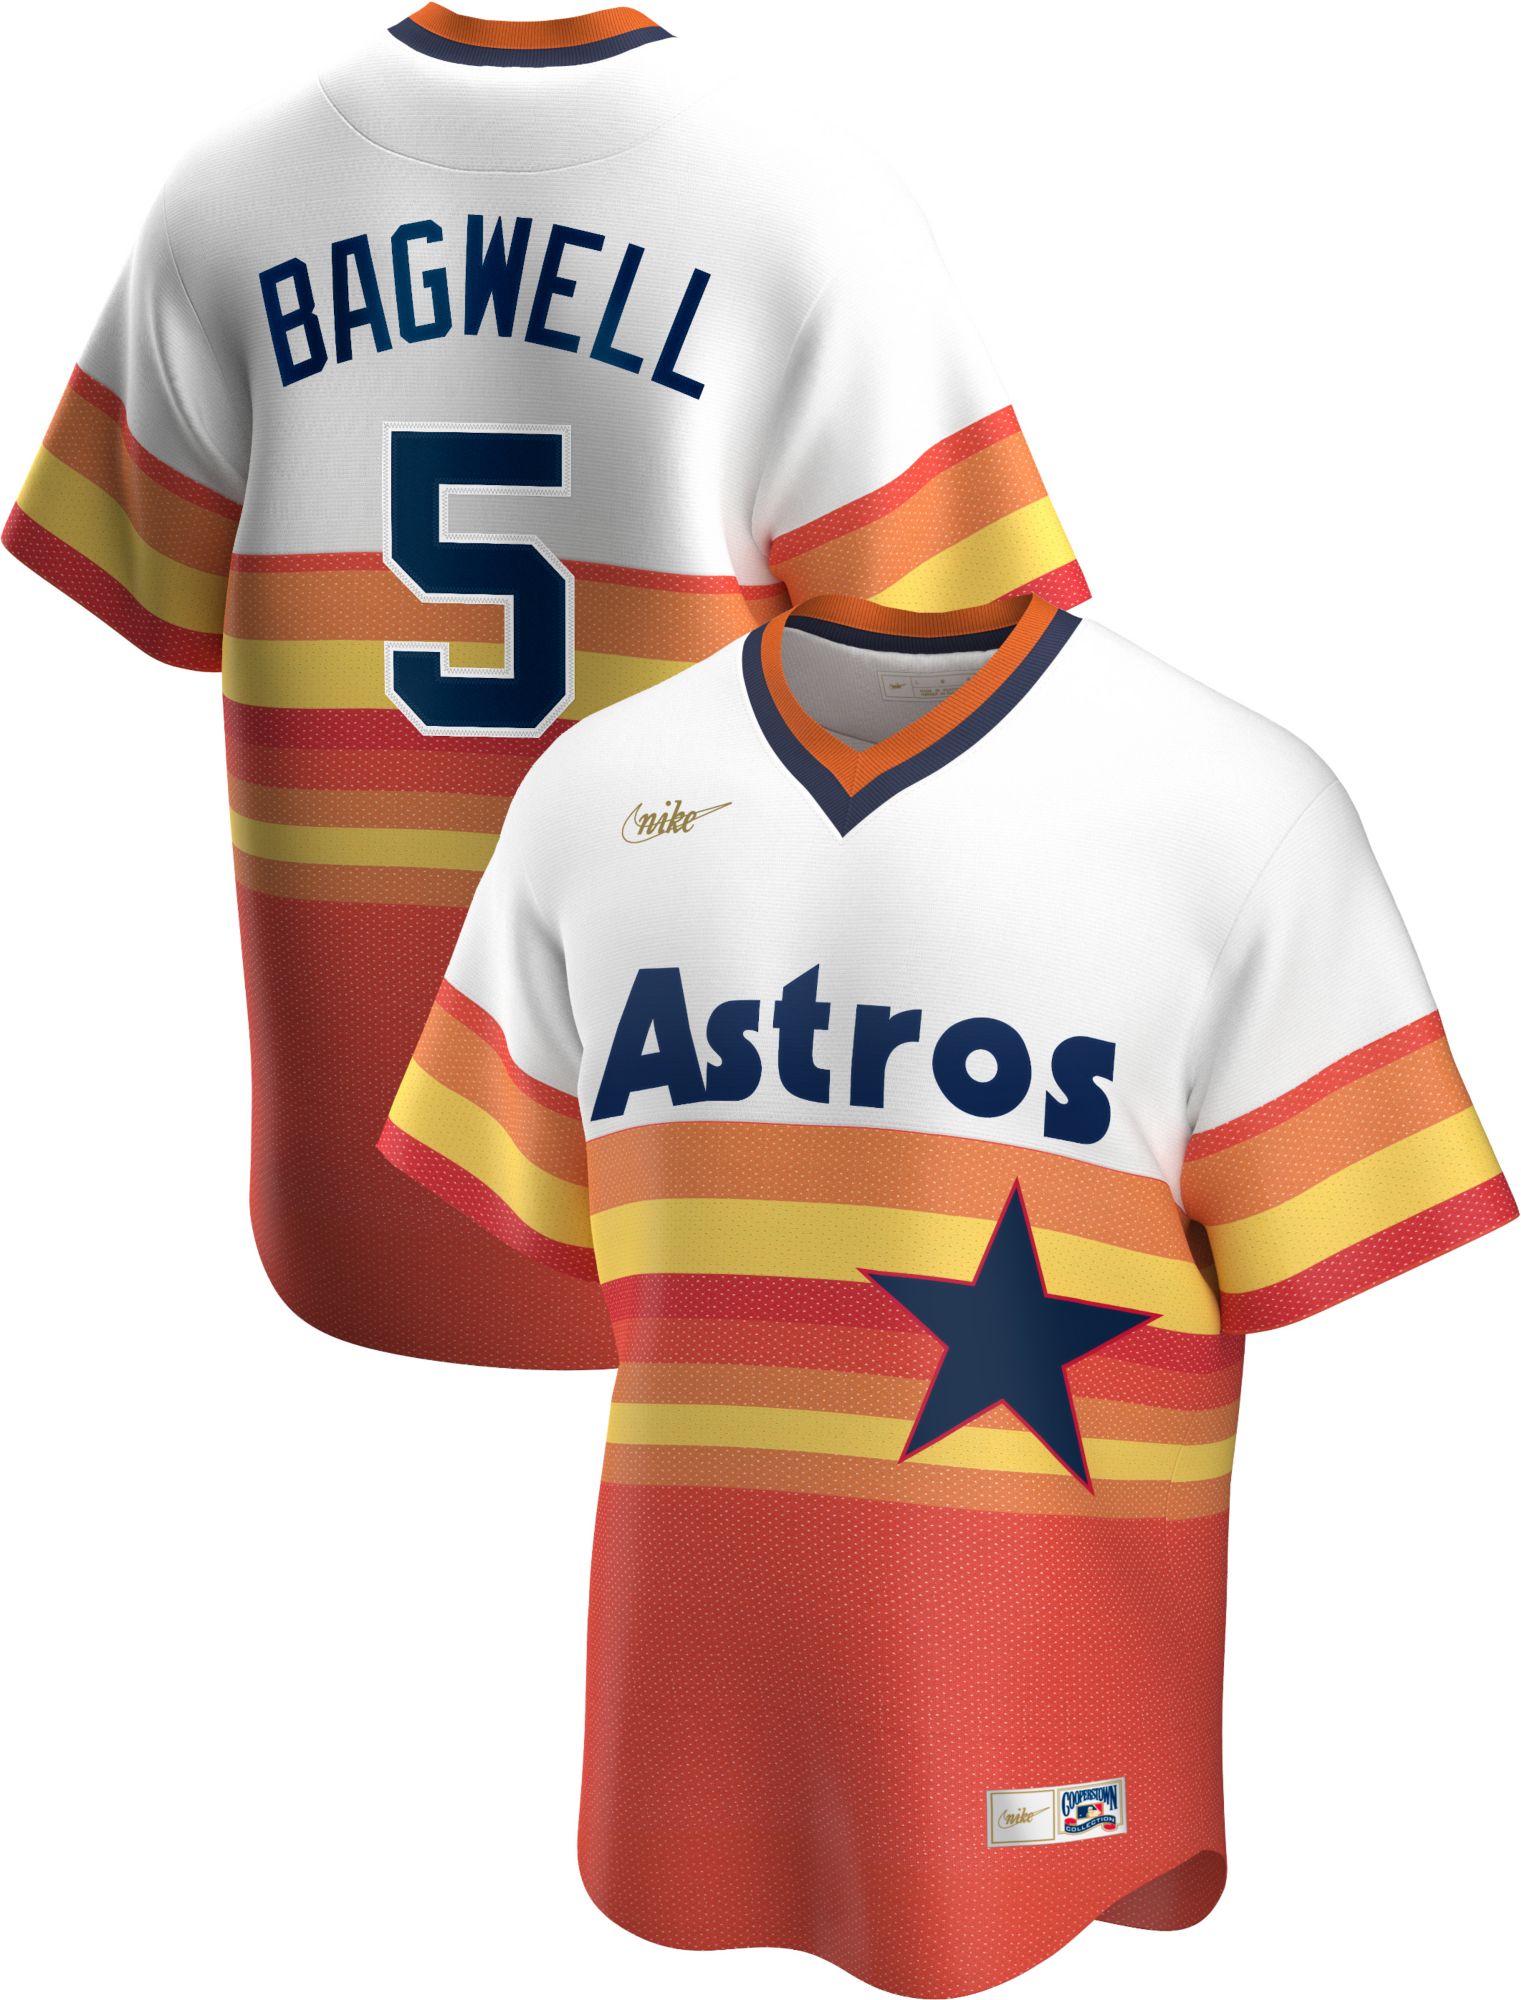 astros pullover jersey